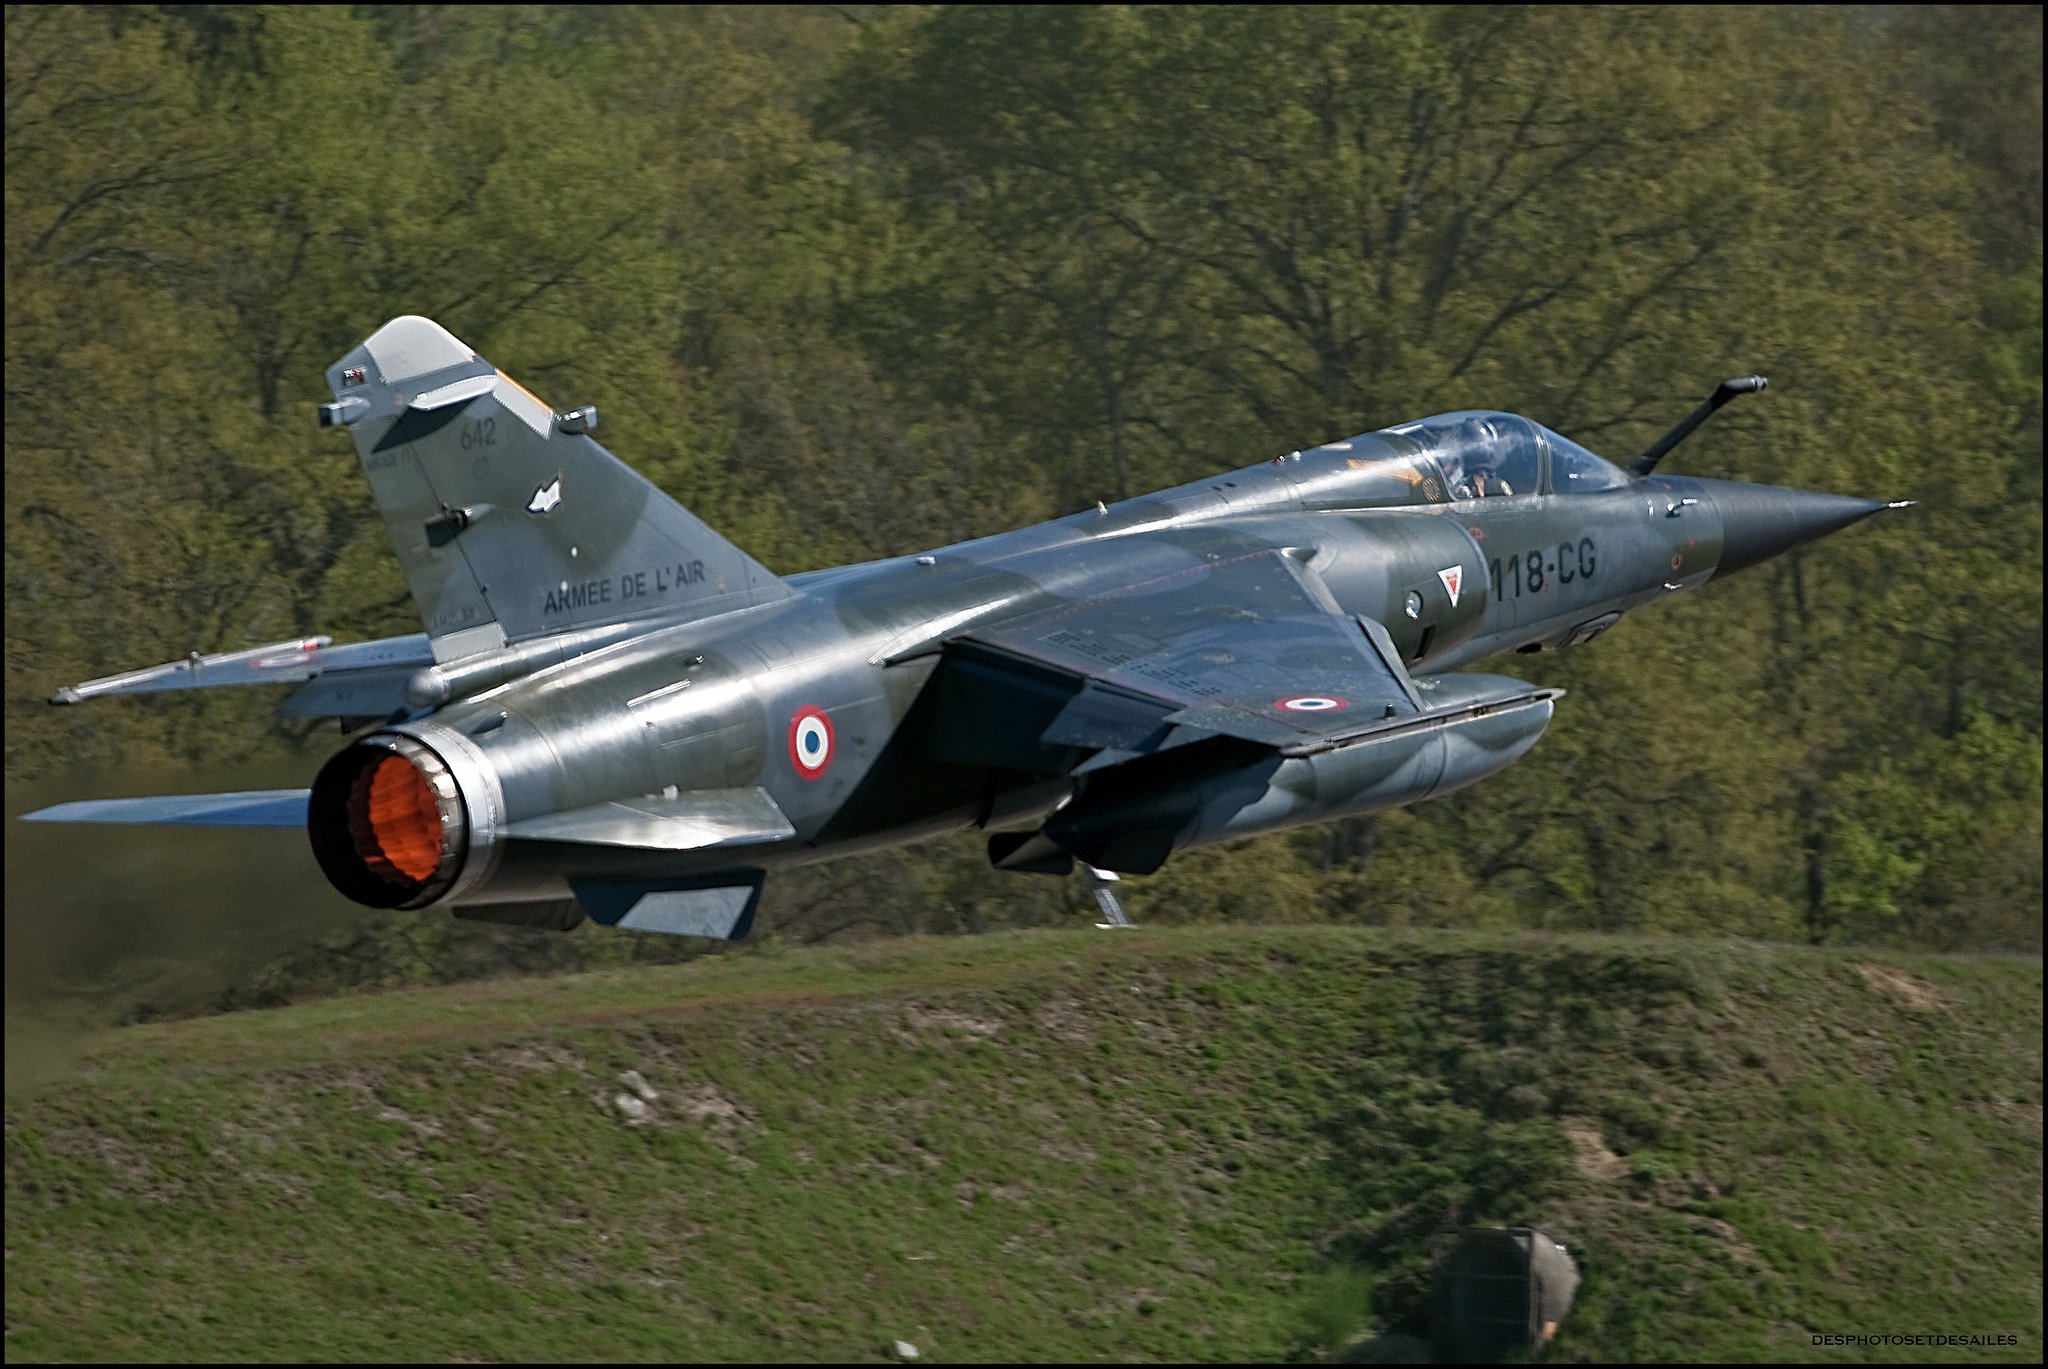 aircraft, Army, Attack, Dassault, Fighter, French, Jet, Military, Mirage f1 Wallpaper